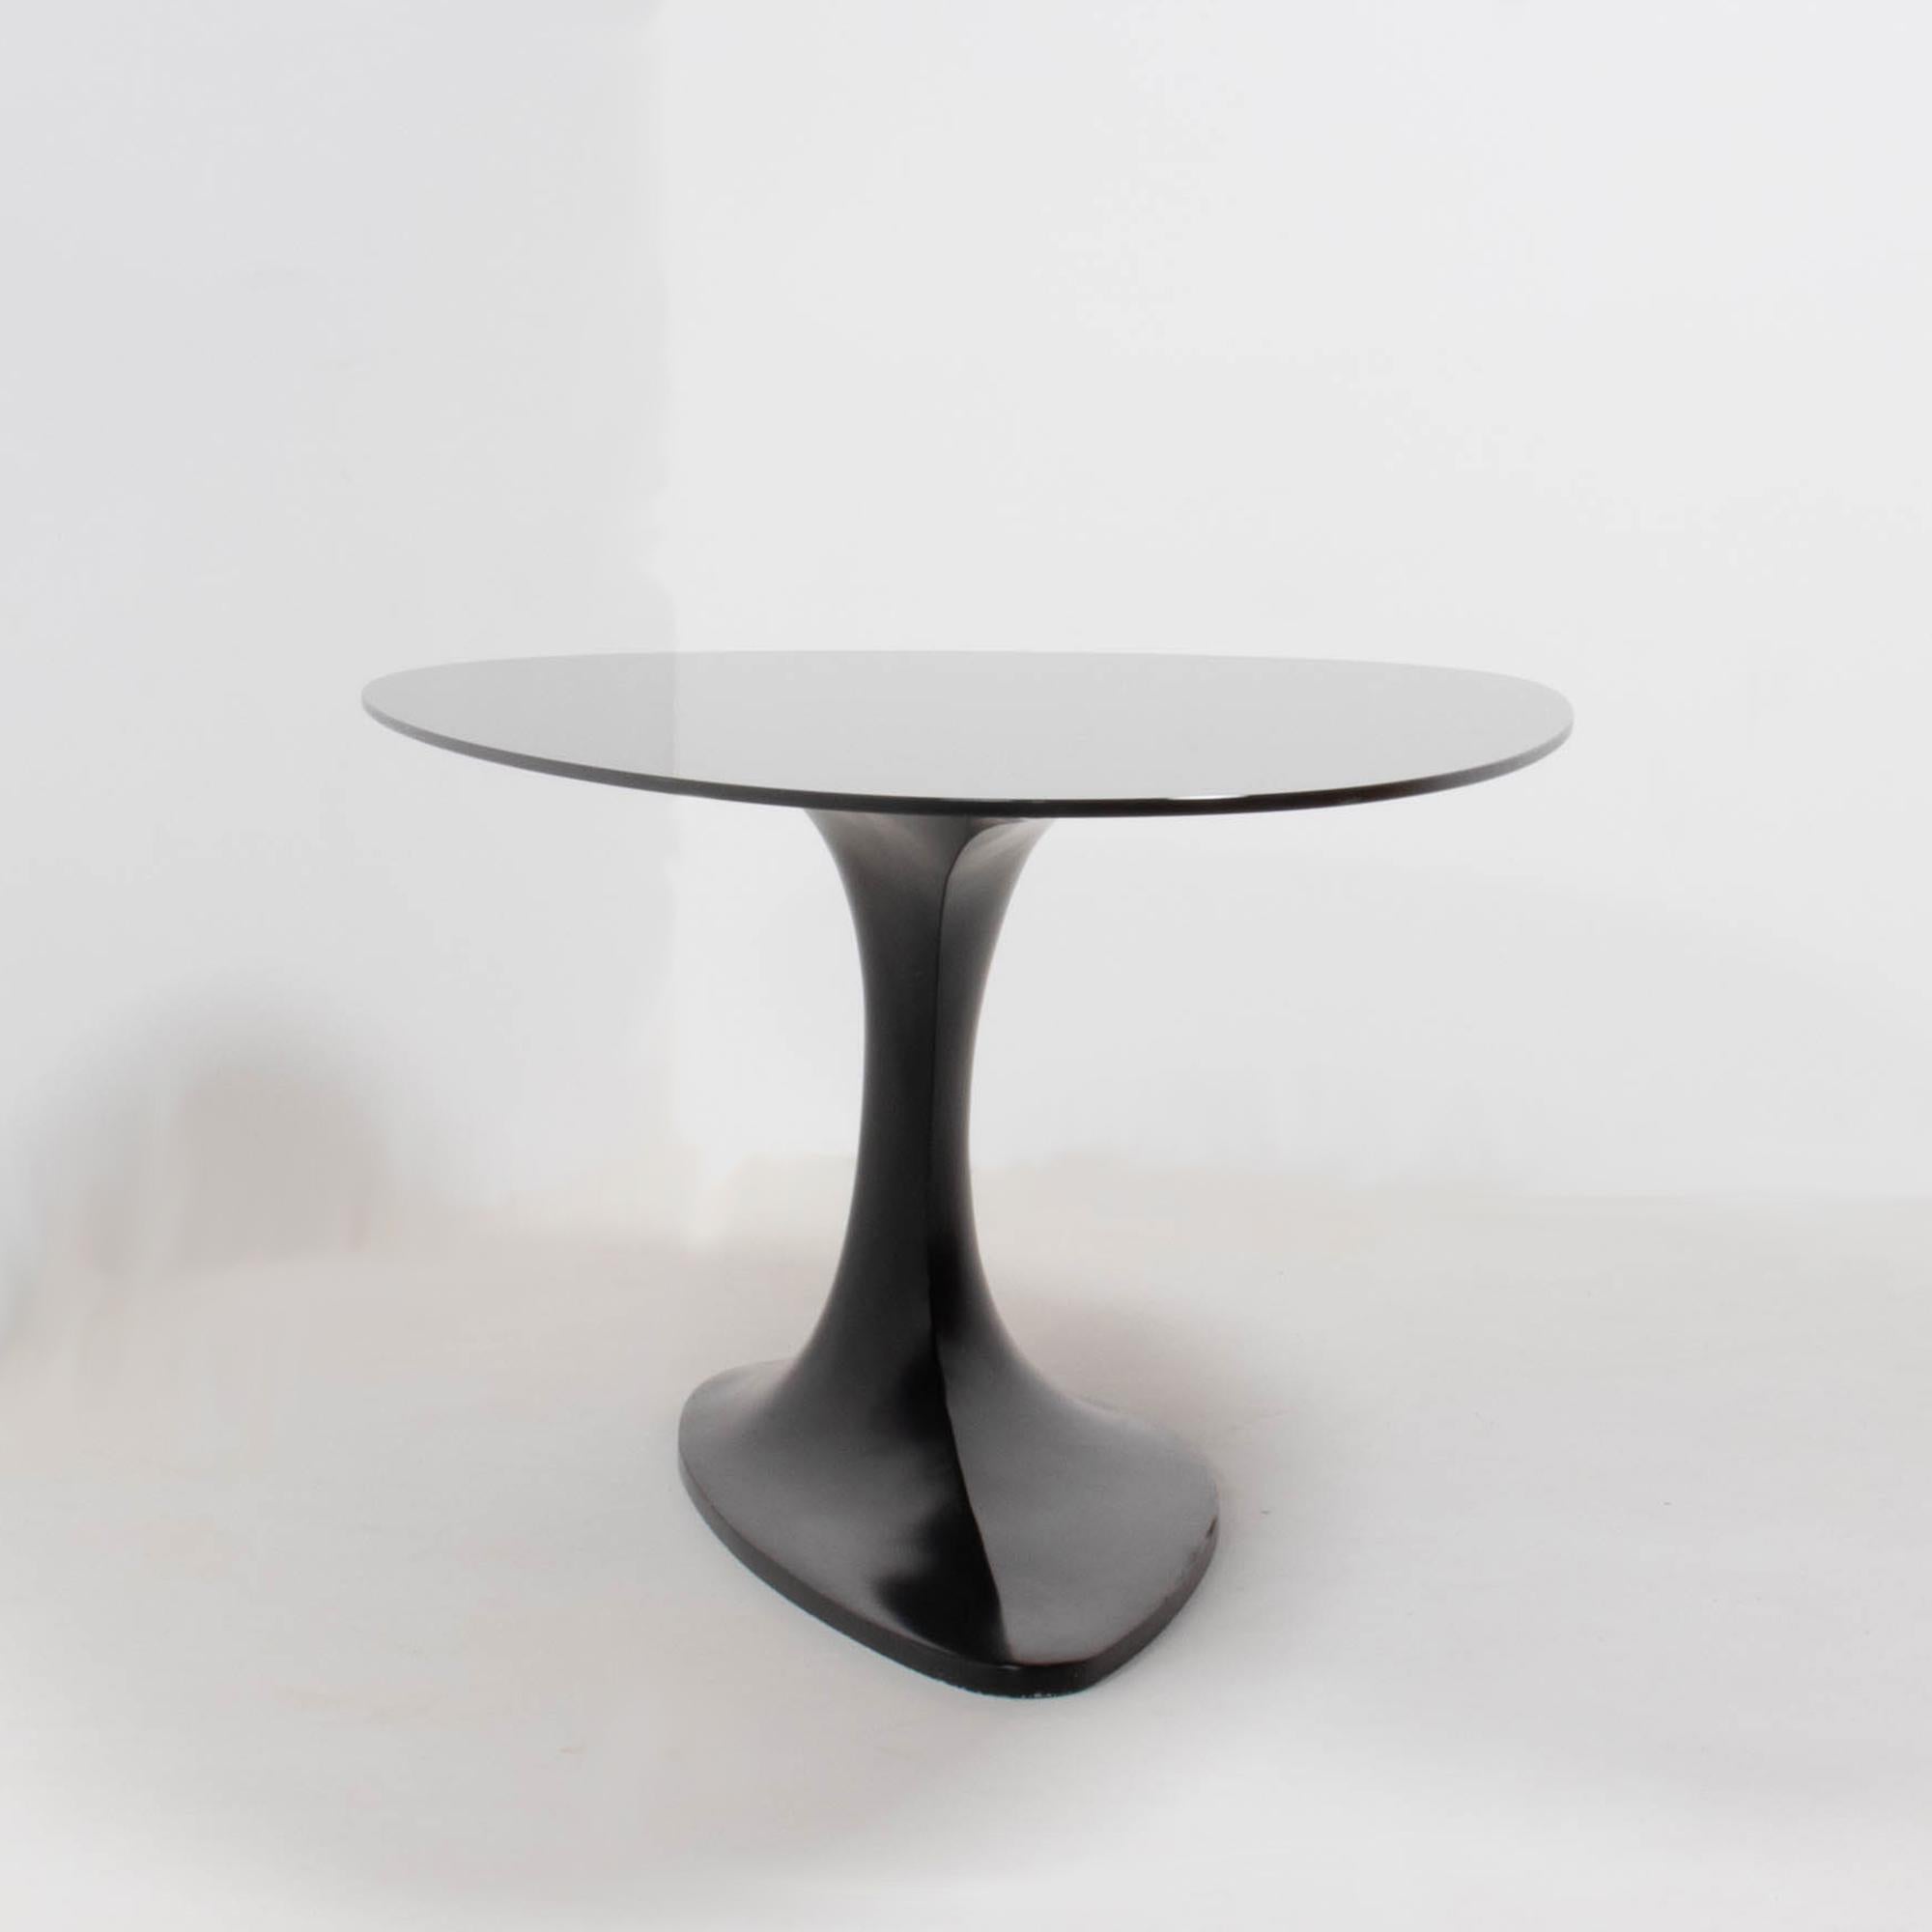 Glass Roche Bobois Black Dining Table and Six Chairs by Sacha Lakic, 2005